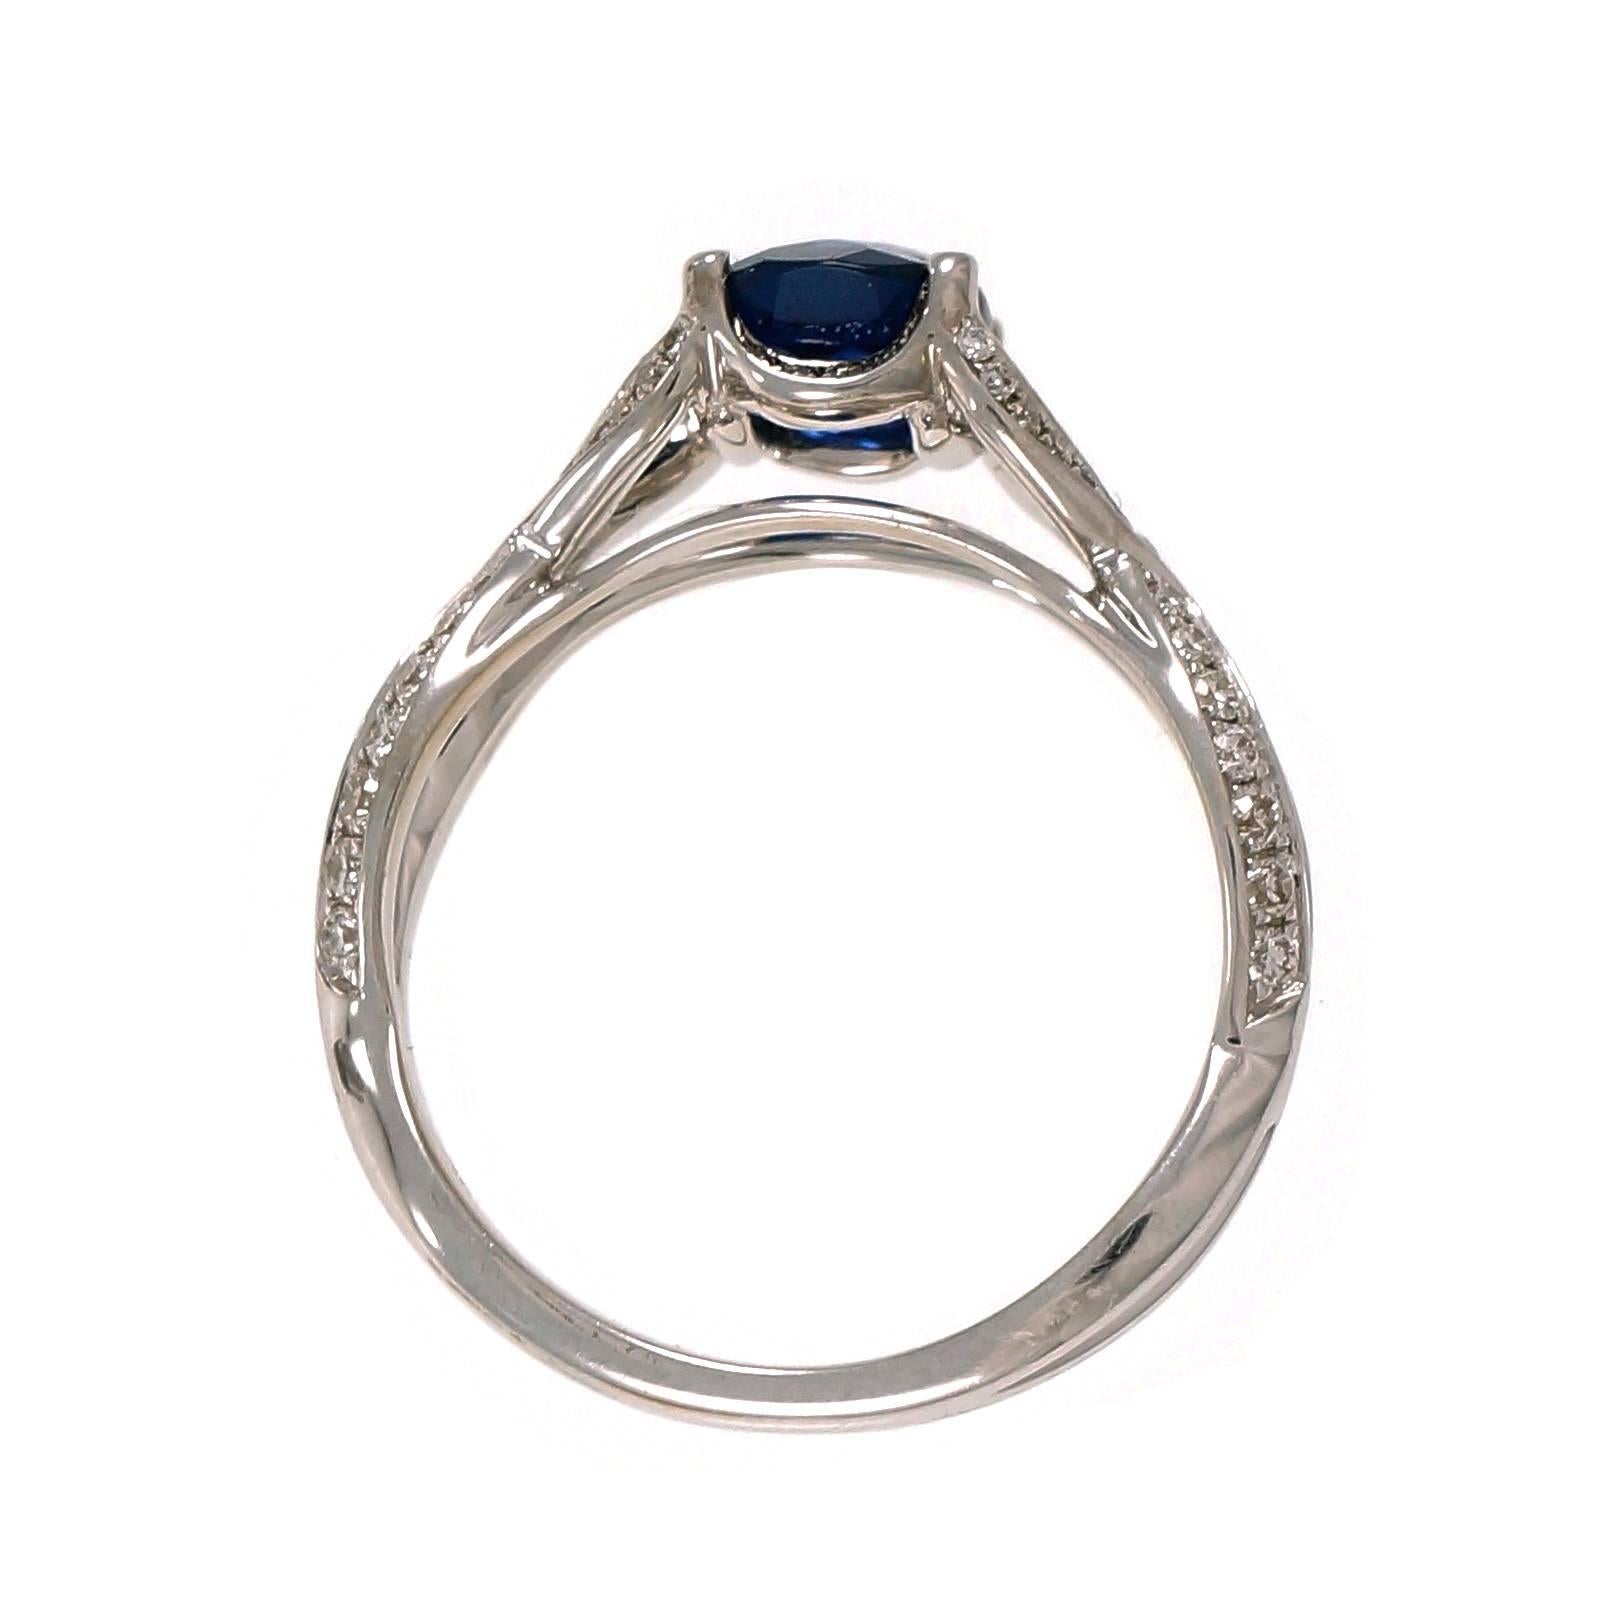 Natural no heat cushion Sapphire and diamond engagement ring, in an 18k white gold settng.

1 cushion Royal Blue Sapphire, approx. total weight 1.25cts, no heat, AGL certificate#GB109011
70 round diamonds, approx. total weight .38cts, F, VS
18k